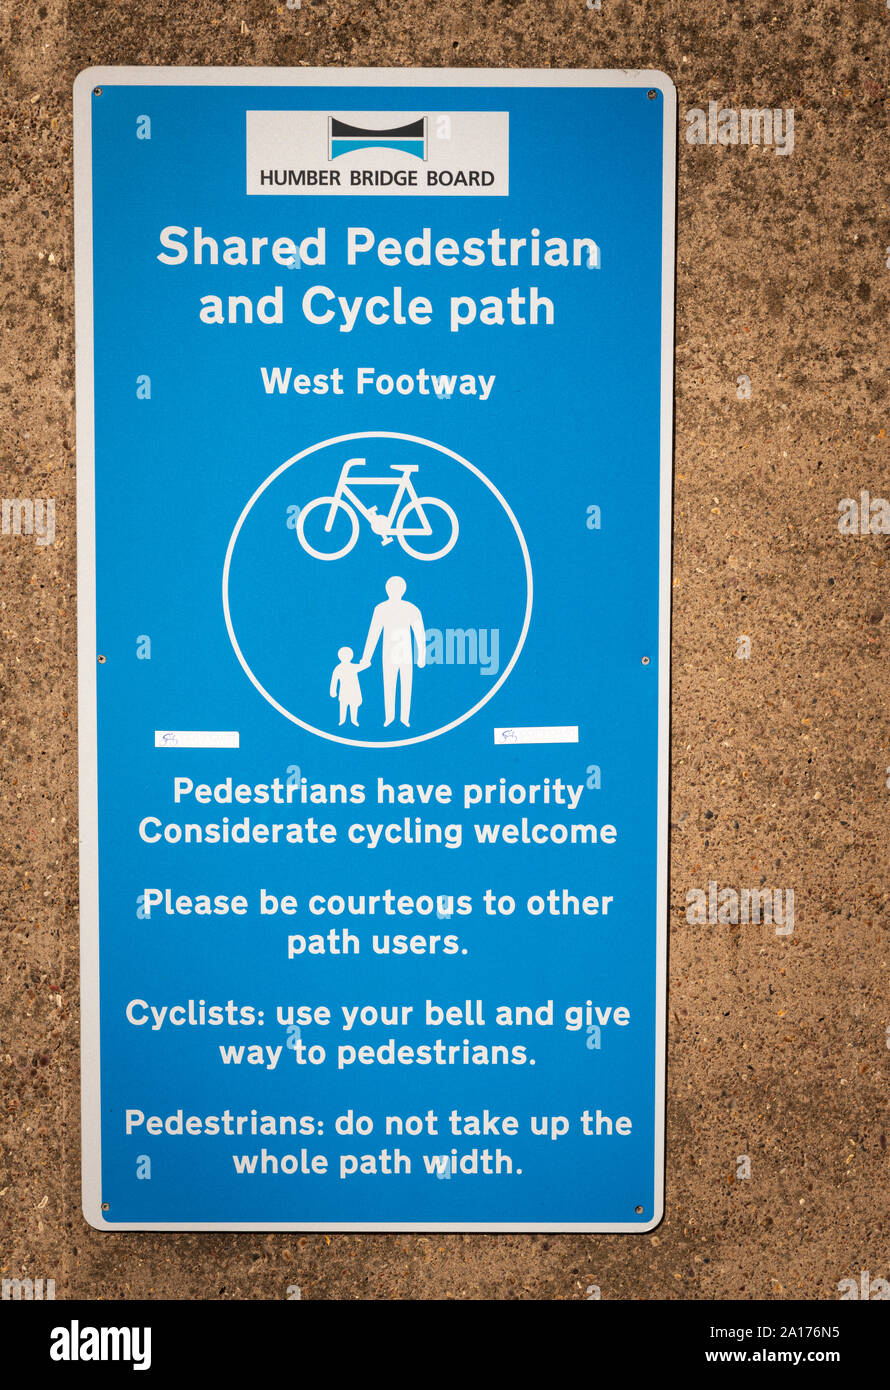 Shared Pedestrian and Cycle path sign on the West Footway of the Humber Bridge, East Yorkshire, England. 21 September 2019 Stock Photo